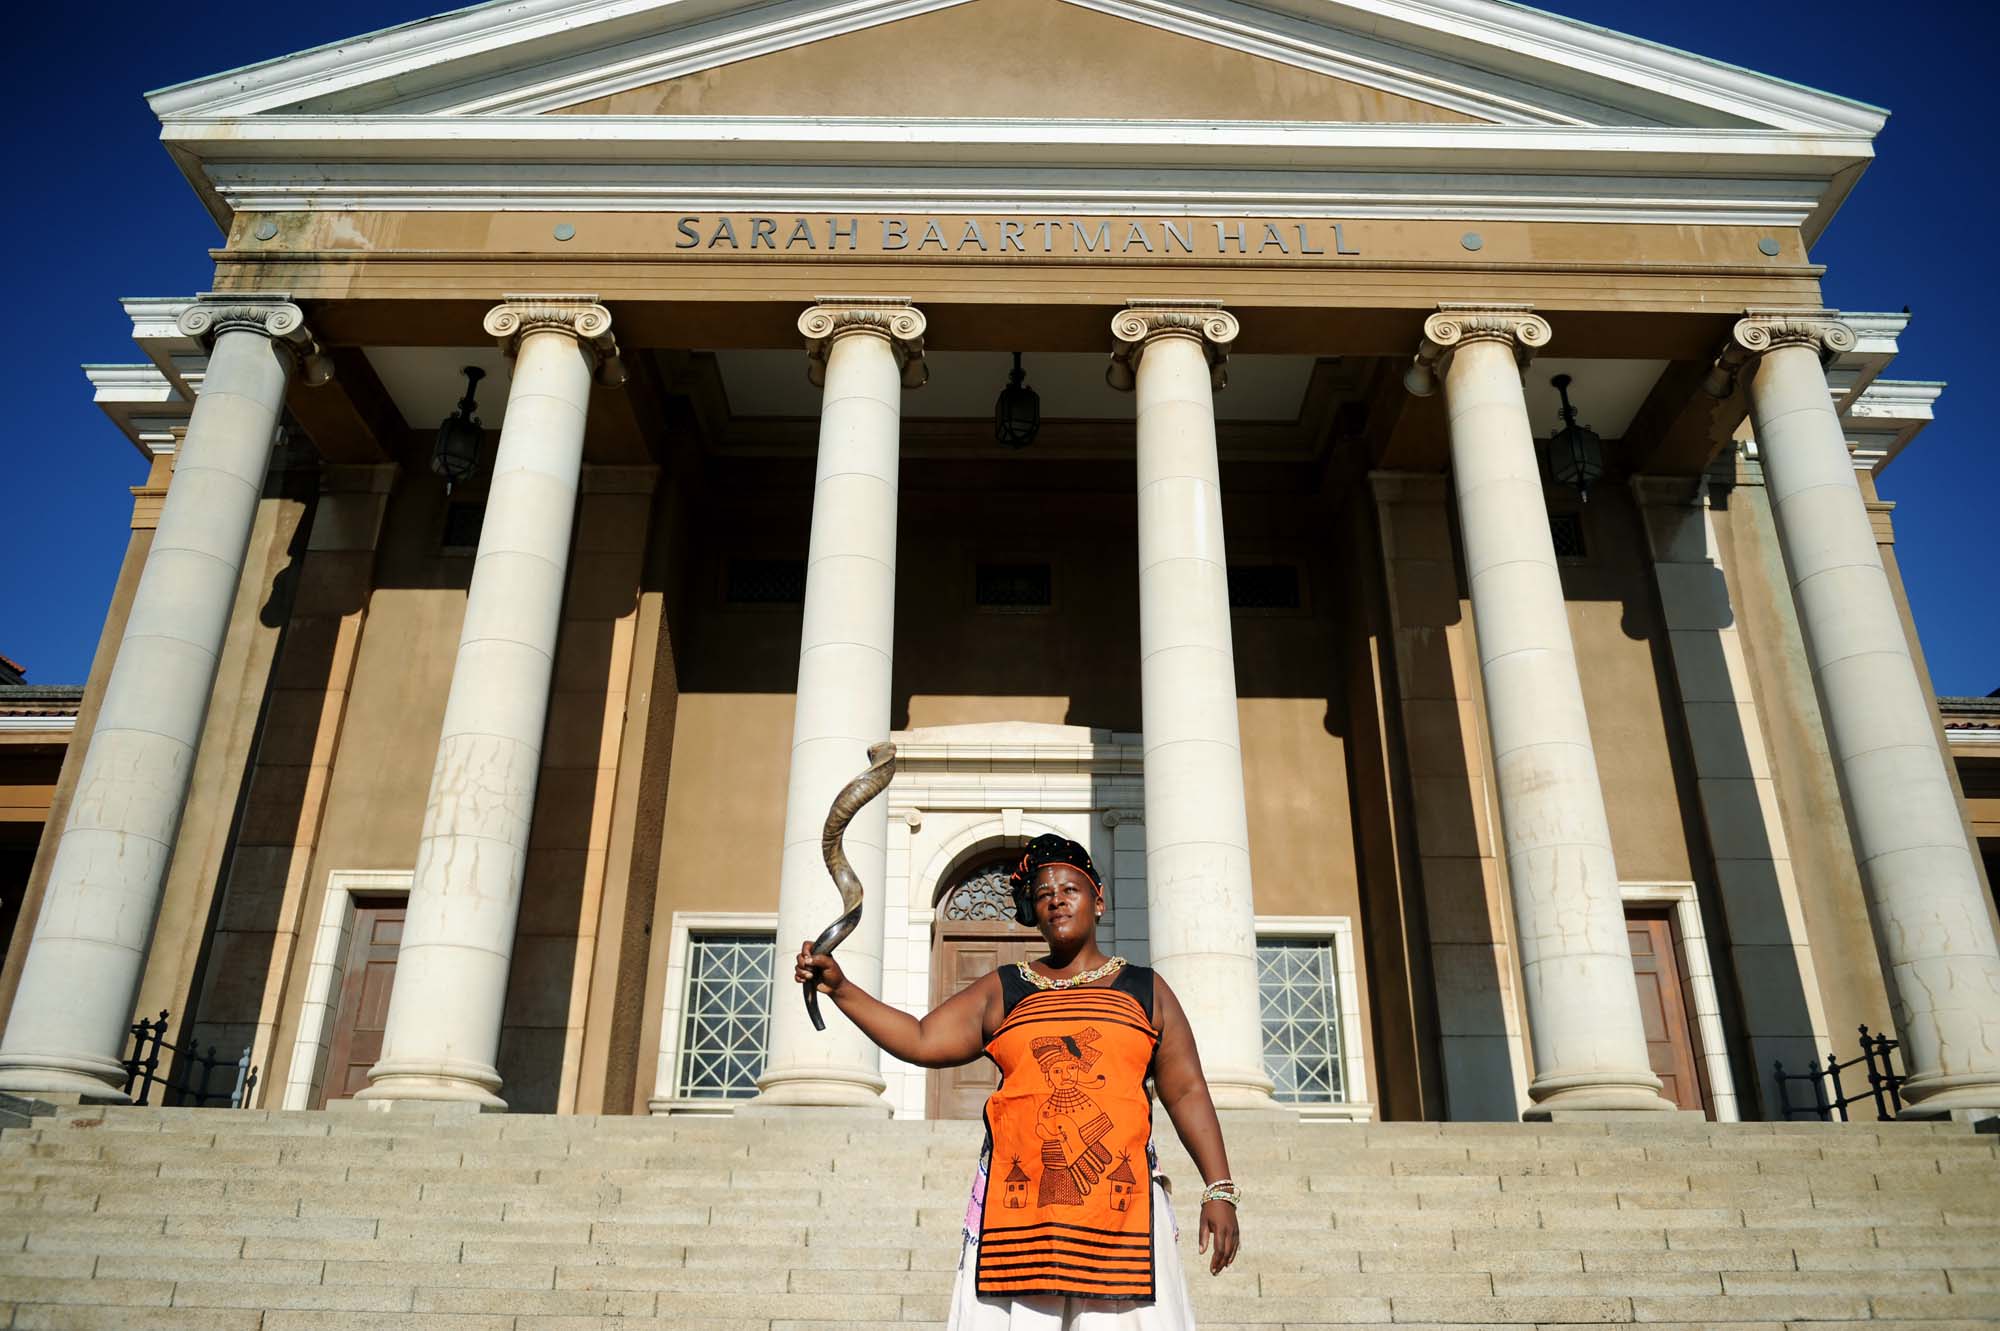 <i>Imbongi</i> Neliswa Scampi dedicated her performance to Bongani Mayosi, the former dean of the Faculty of Health Sciences, in front of the Sarah Baartman Hall on upper campus.